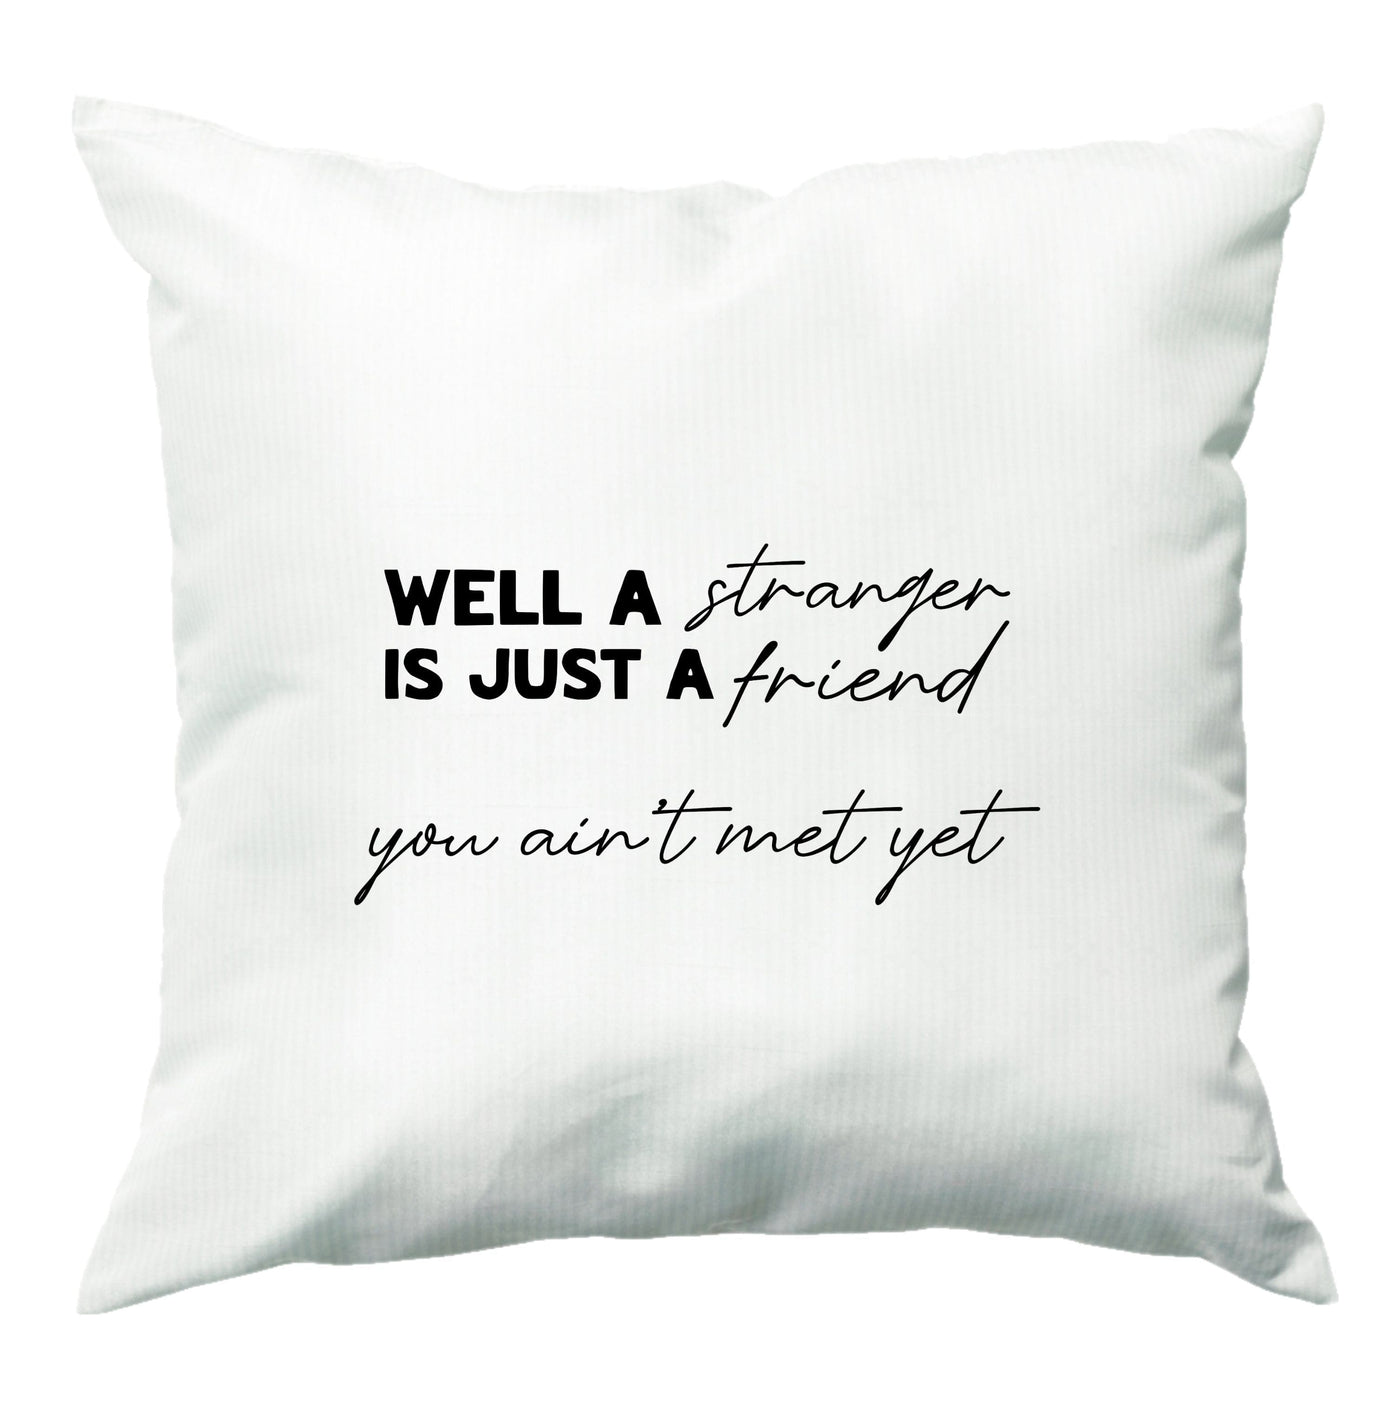 Well A Stranger Is Just A Friend - The Boys Cushion